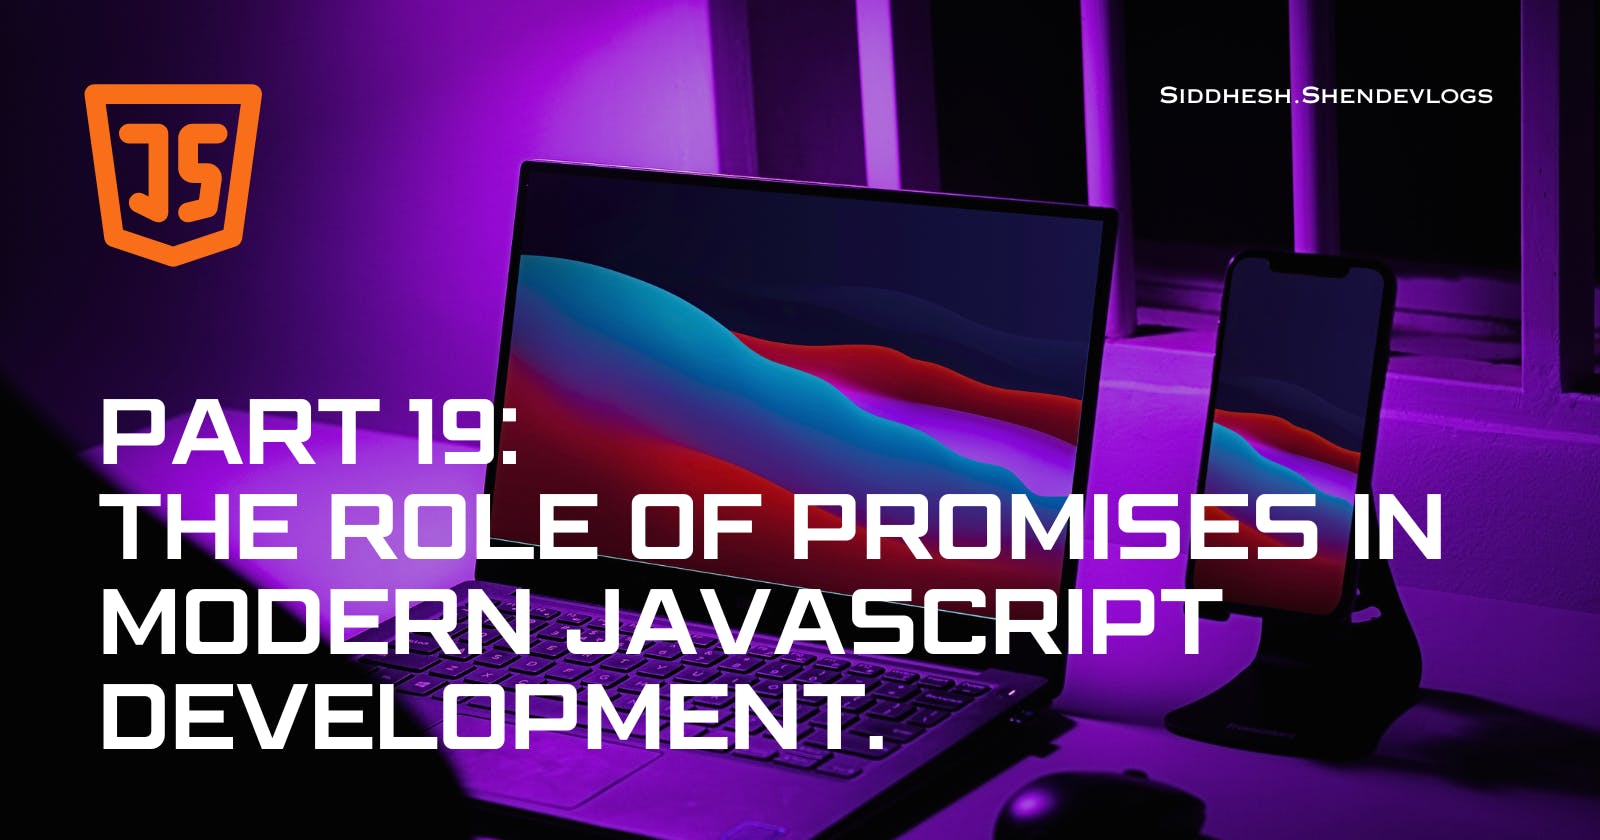 The Role of Promises in Modern JavaScript Development.